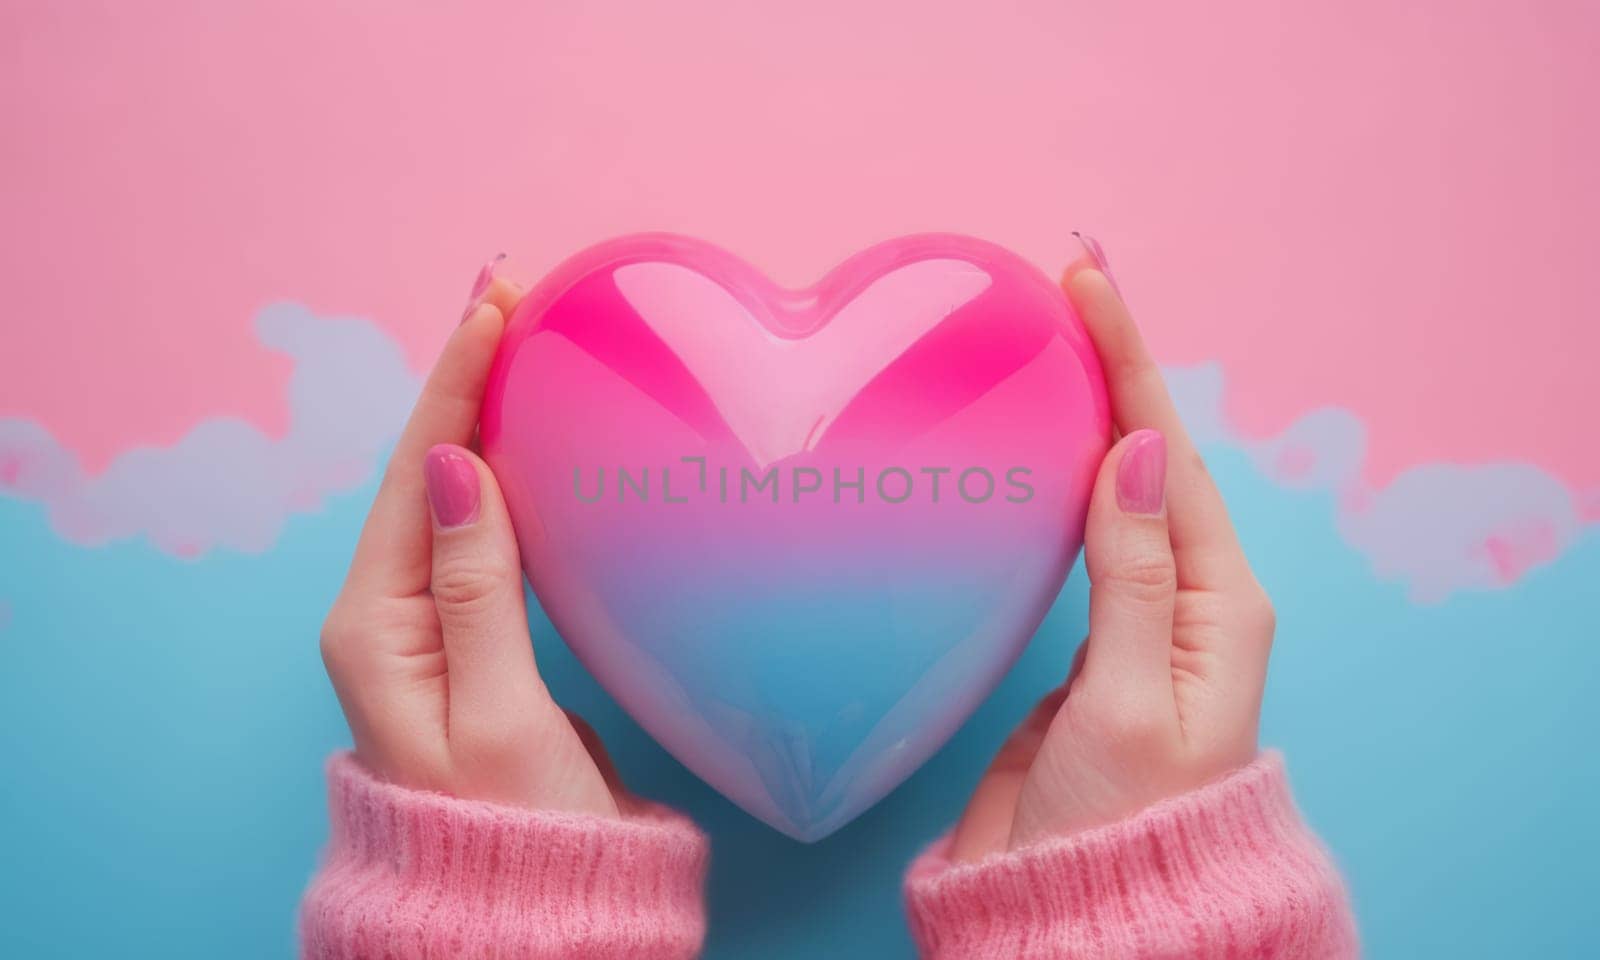 Hands delicately holding a pink heart-shaped gift box against a contrasting dual-tone background. The image evokes feelings of love and affection and is perfect for occasions like Valentine s Day or anniversaries.